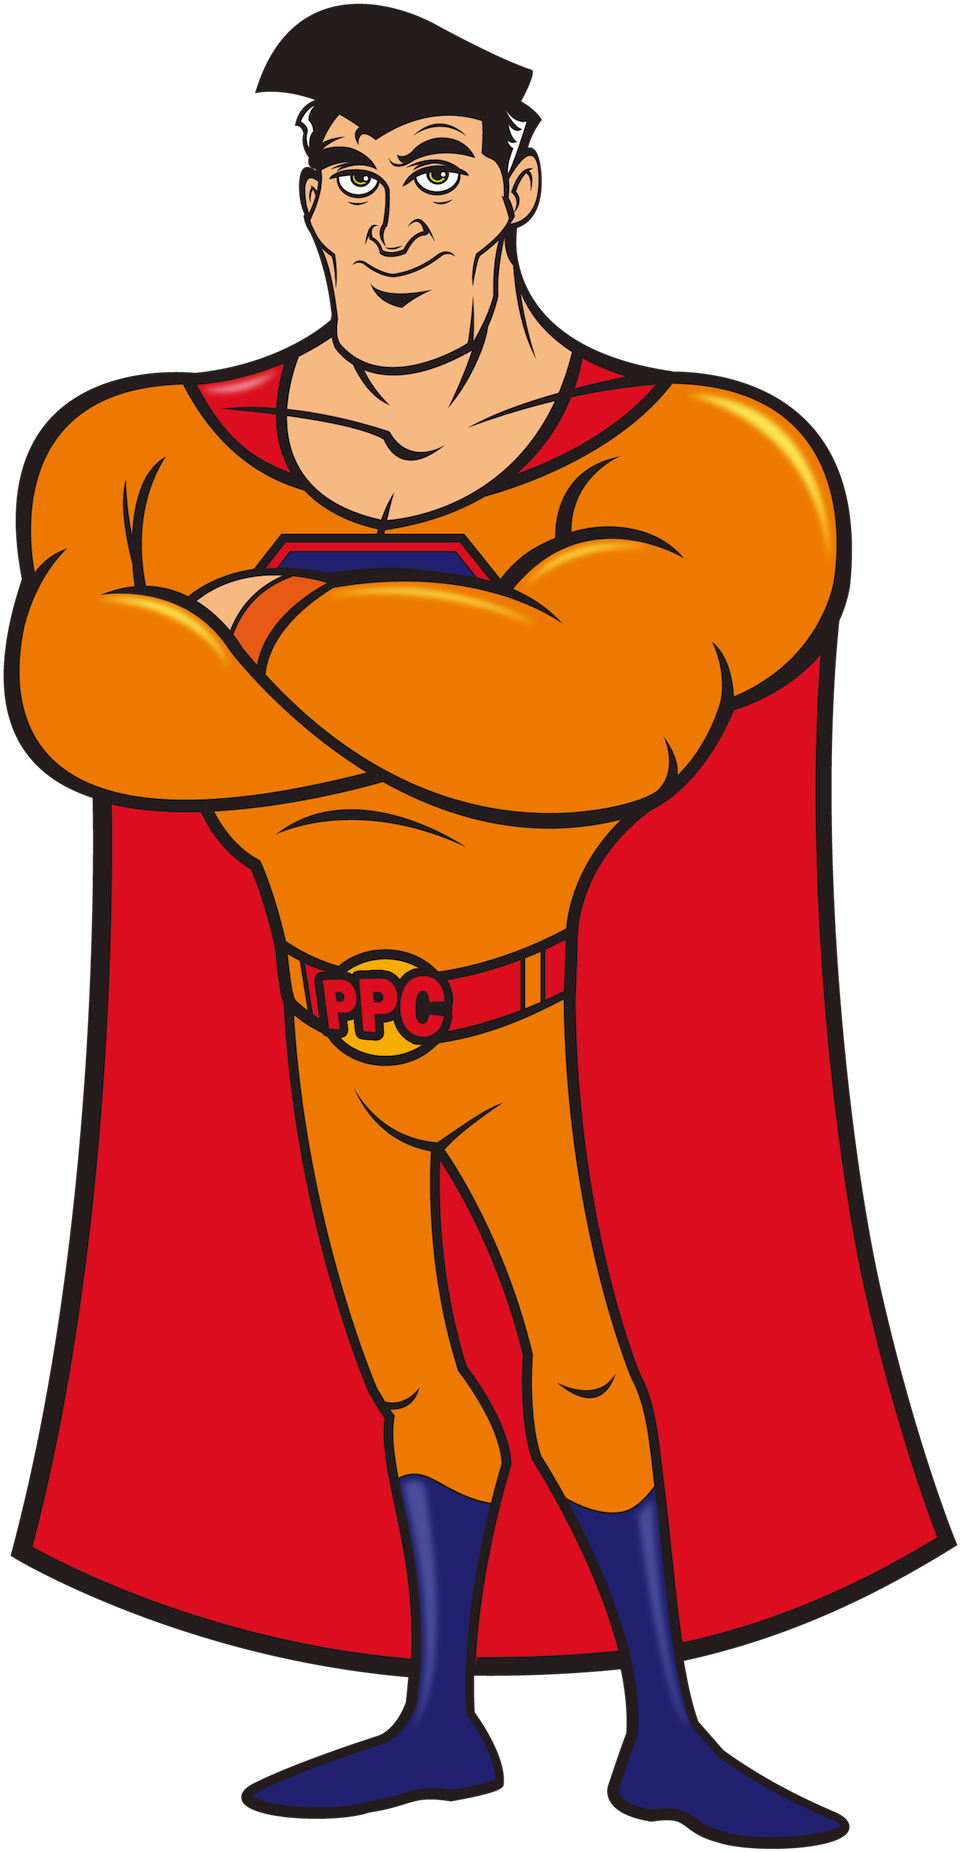 Ppc Hero Turns Six - Cartoon Clipart - Large Size Png Image - PikPng.